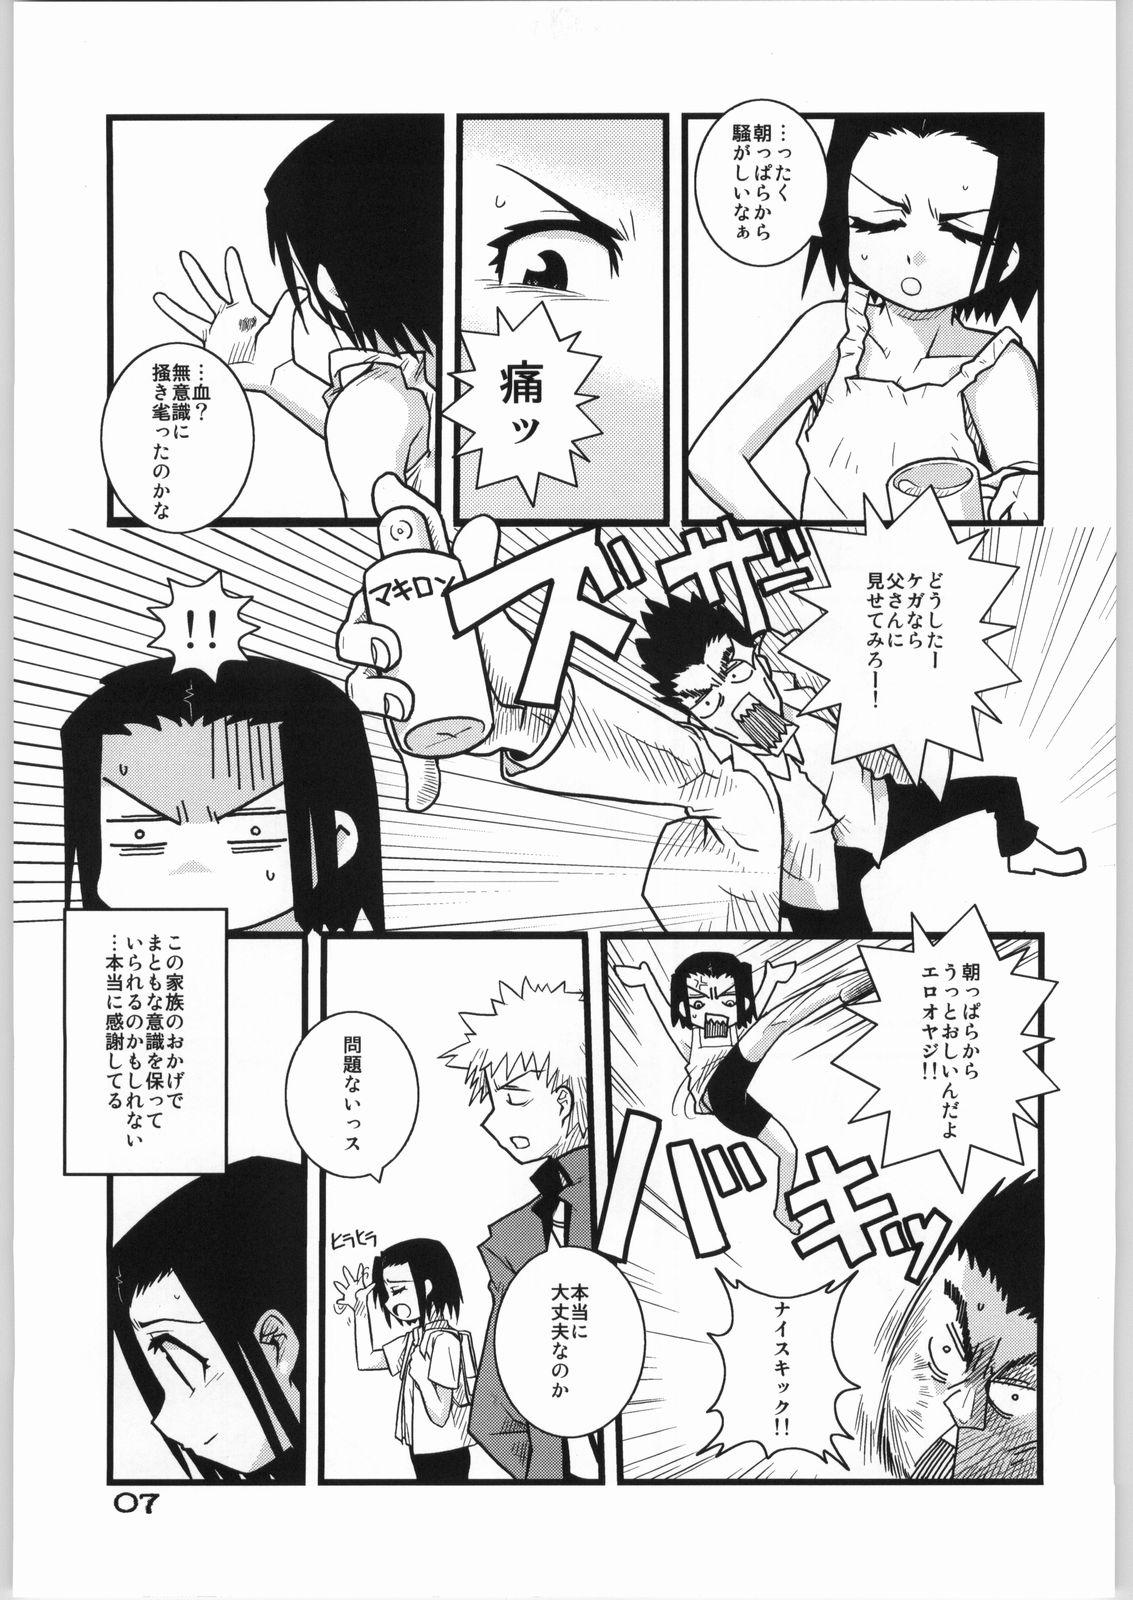 Gostosa Brave Girl & Kind Giant - Bleach Face Fucking - Page 6